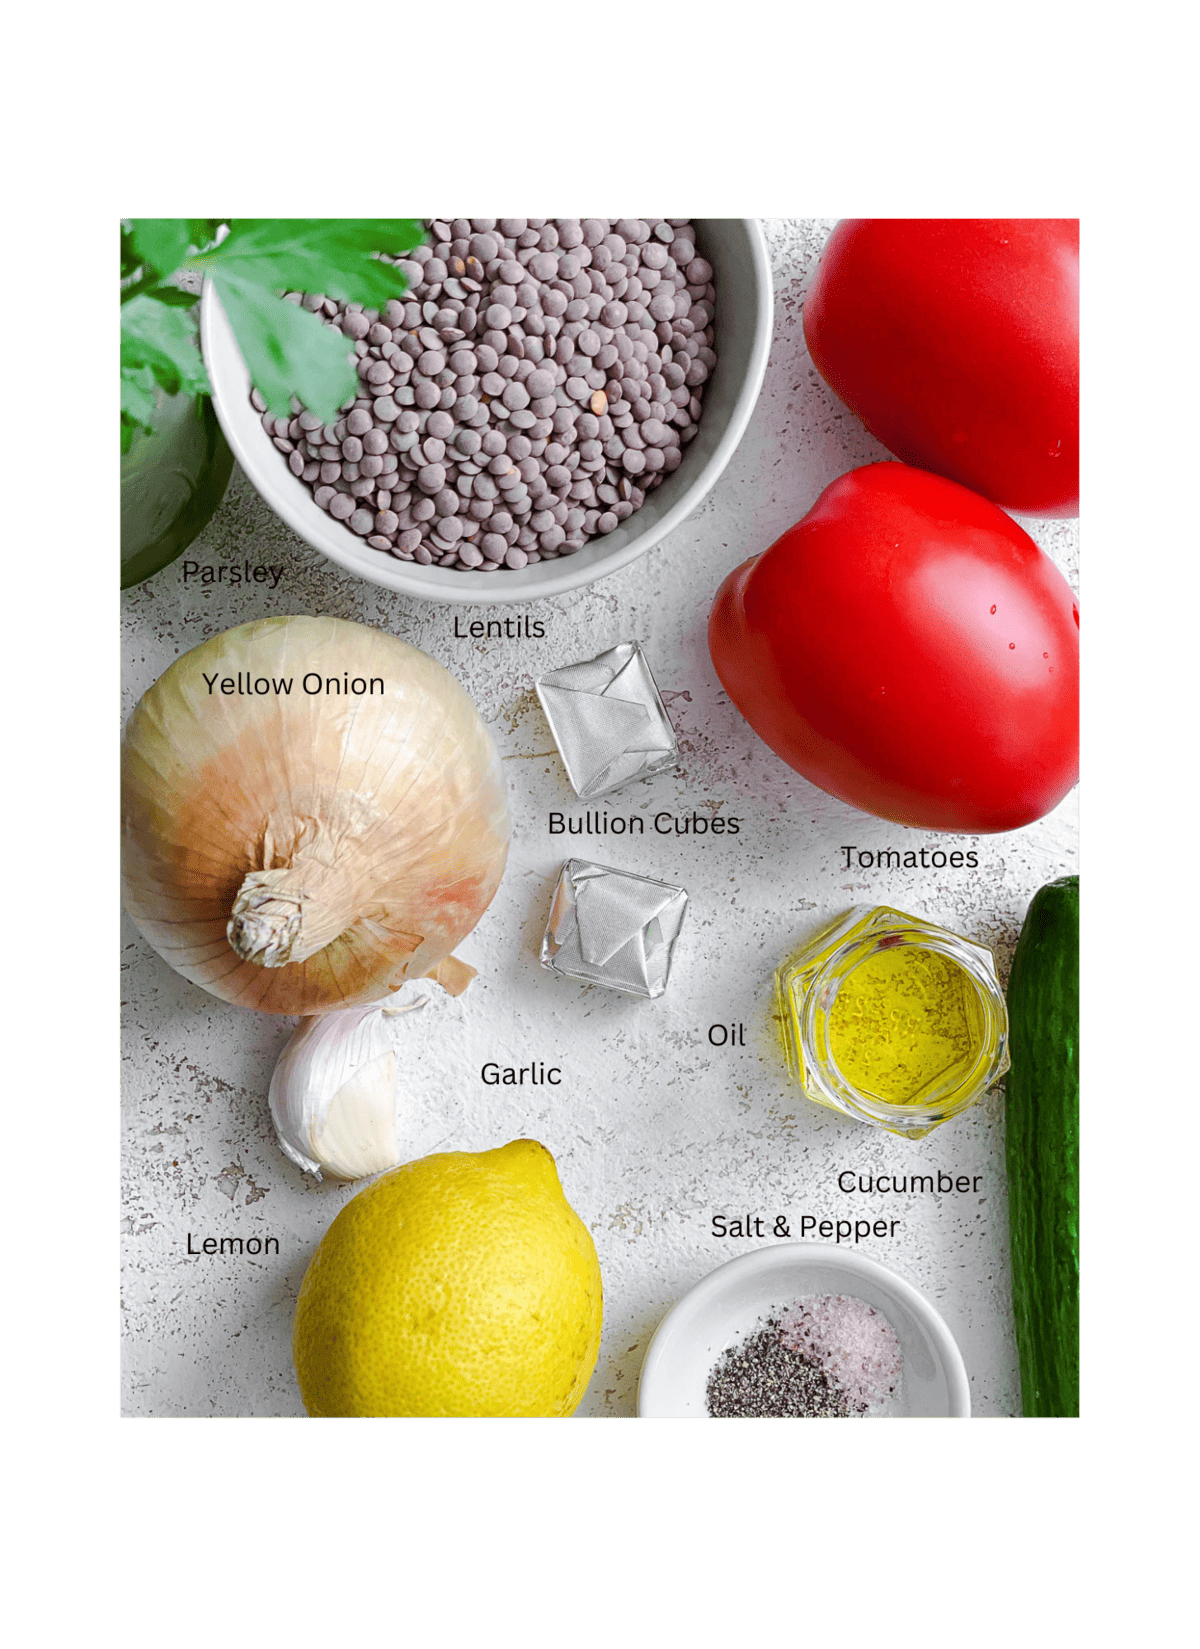 ingredients for Lentil Tabbouleh measured out against a white surface